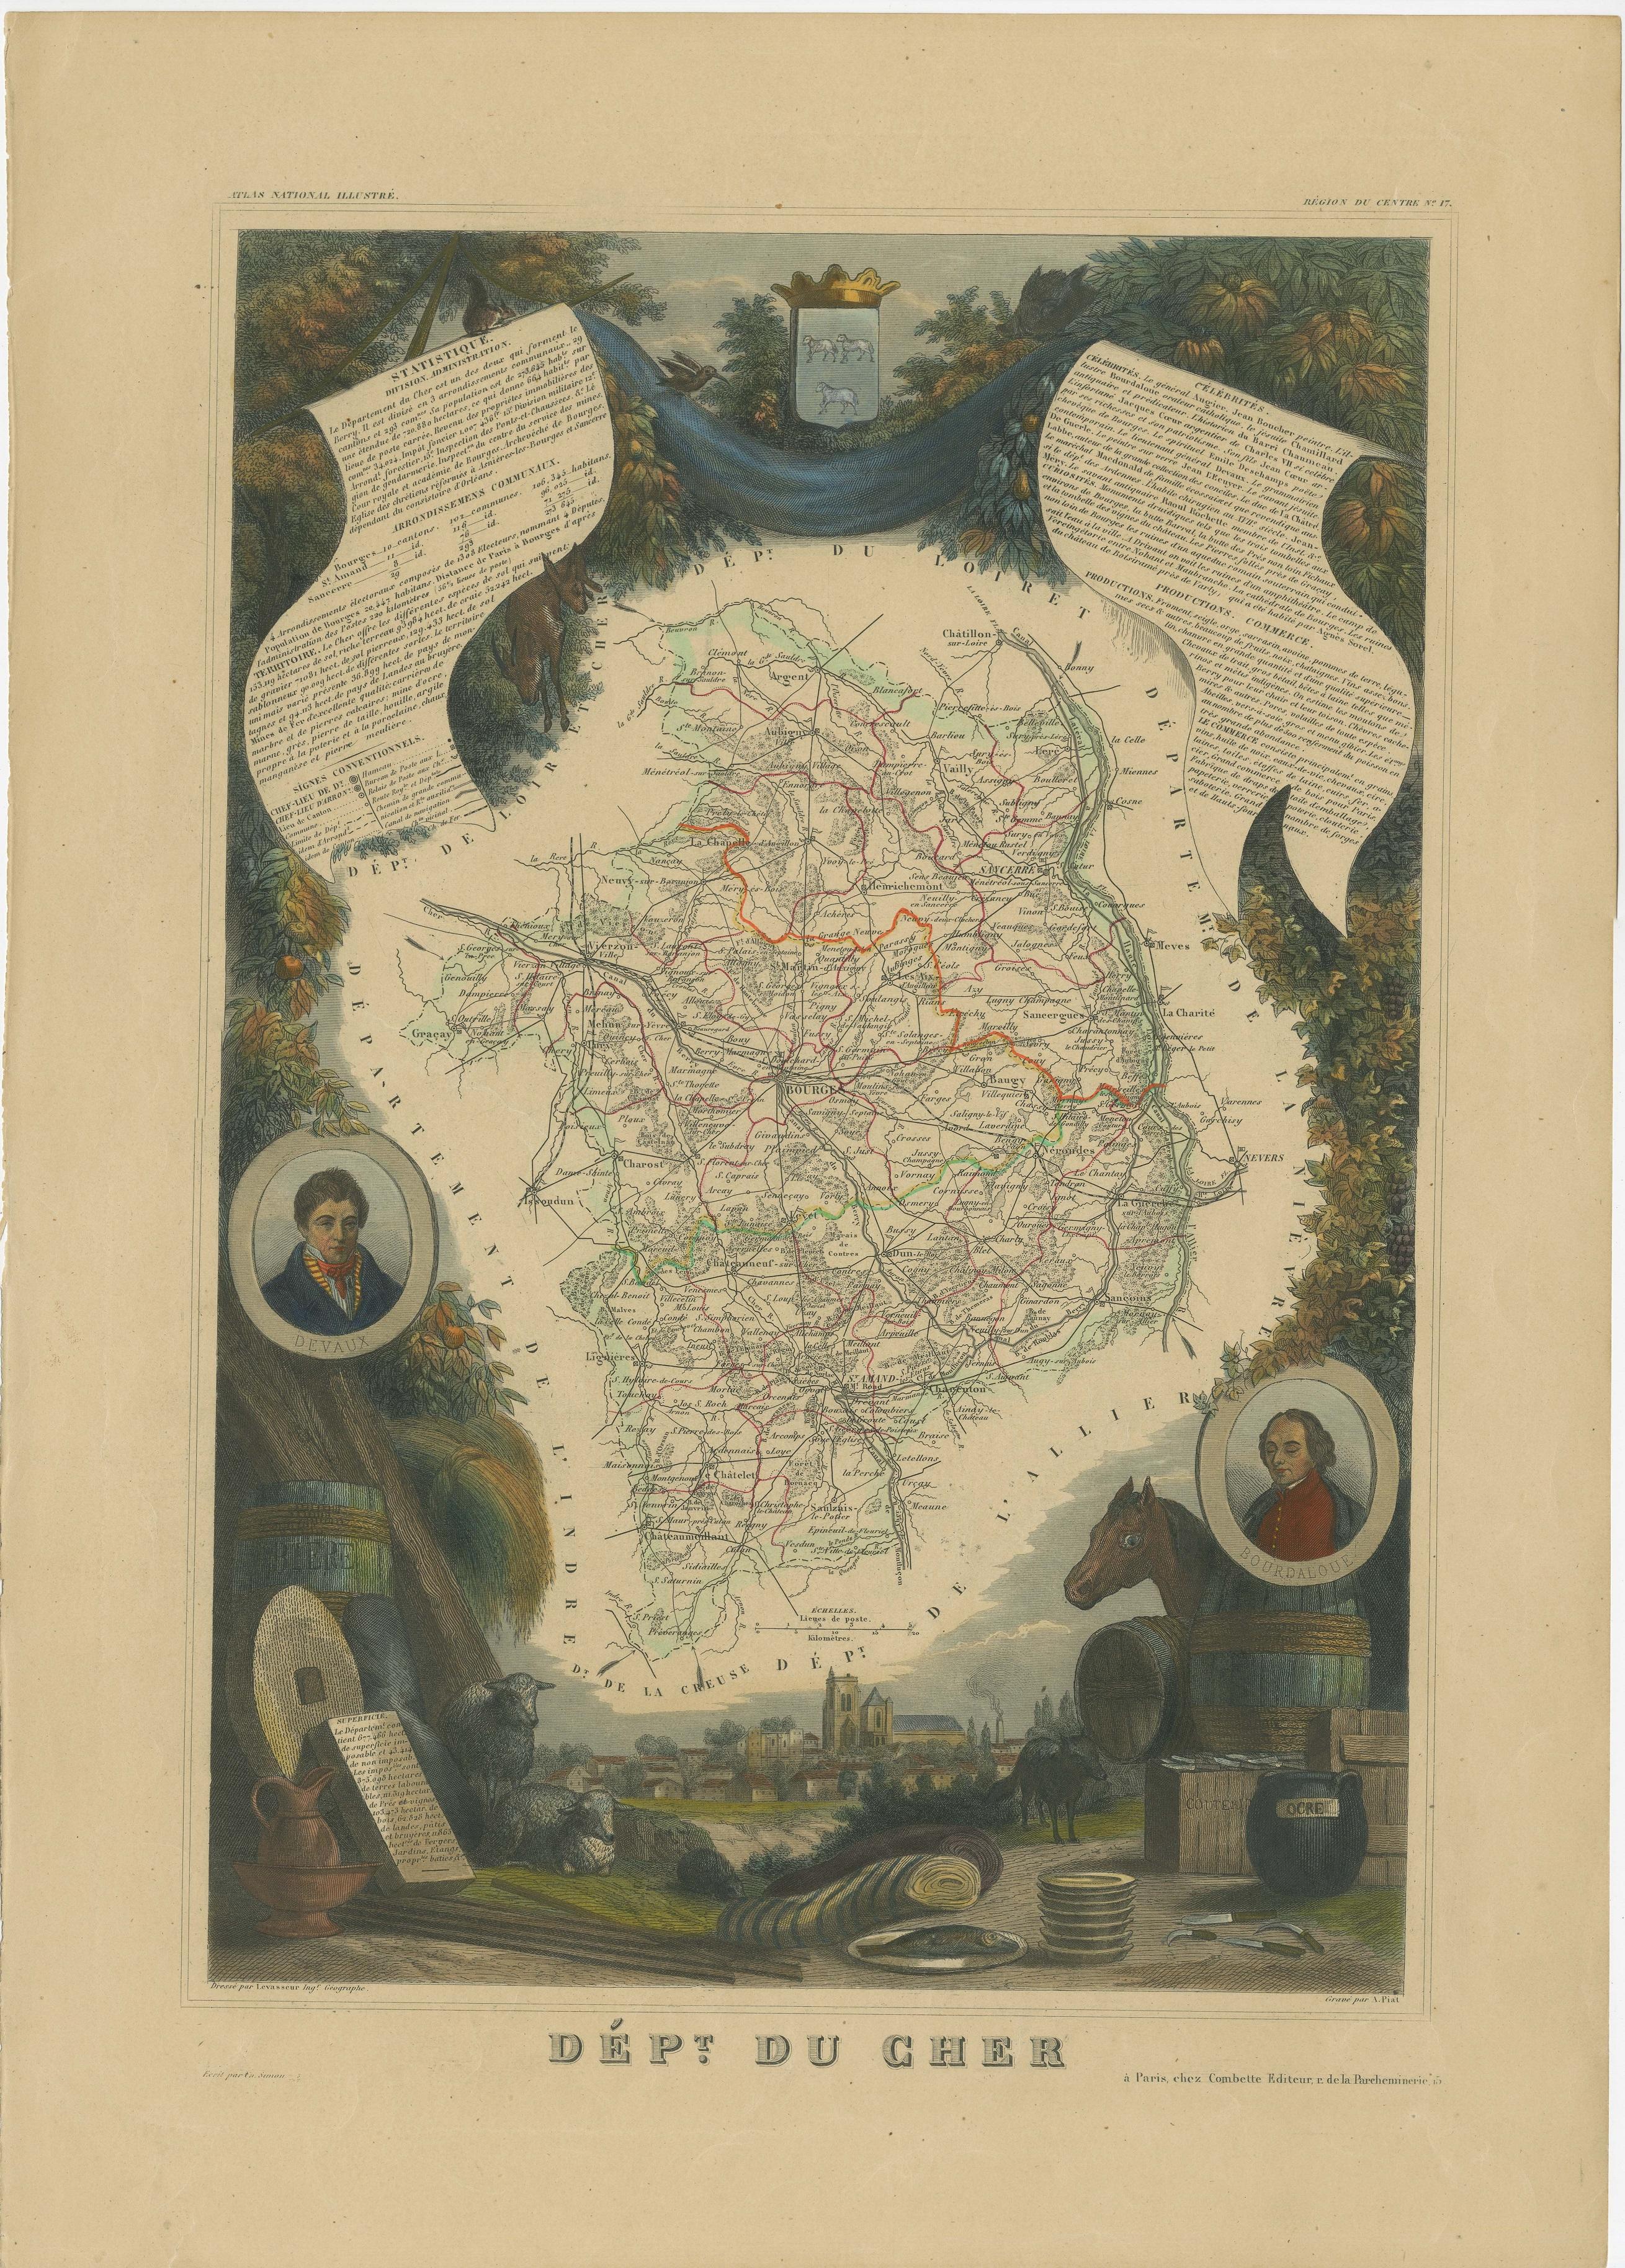 Antique map titled 'Dépt. du Cher'. Map of the French department of Cher, France. This area of France is known for its production of Selles Sur Cher, a goats-milk cheese. The whole is surrounded by elaborate decorative engravings designed to